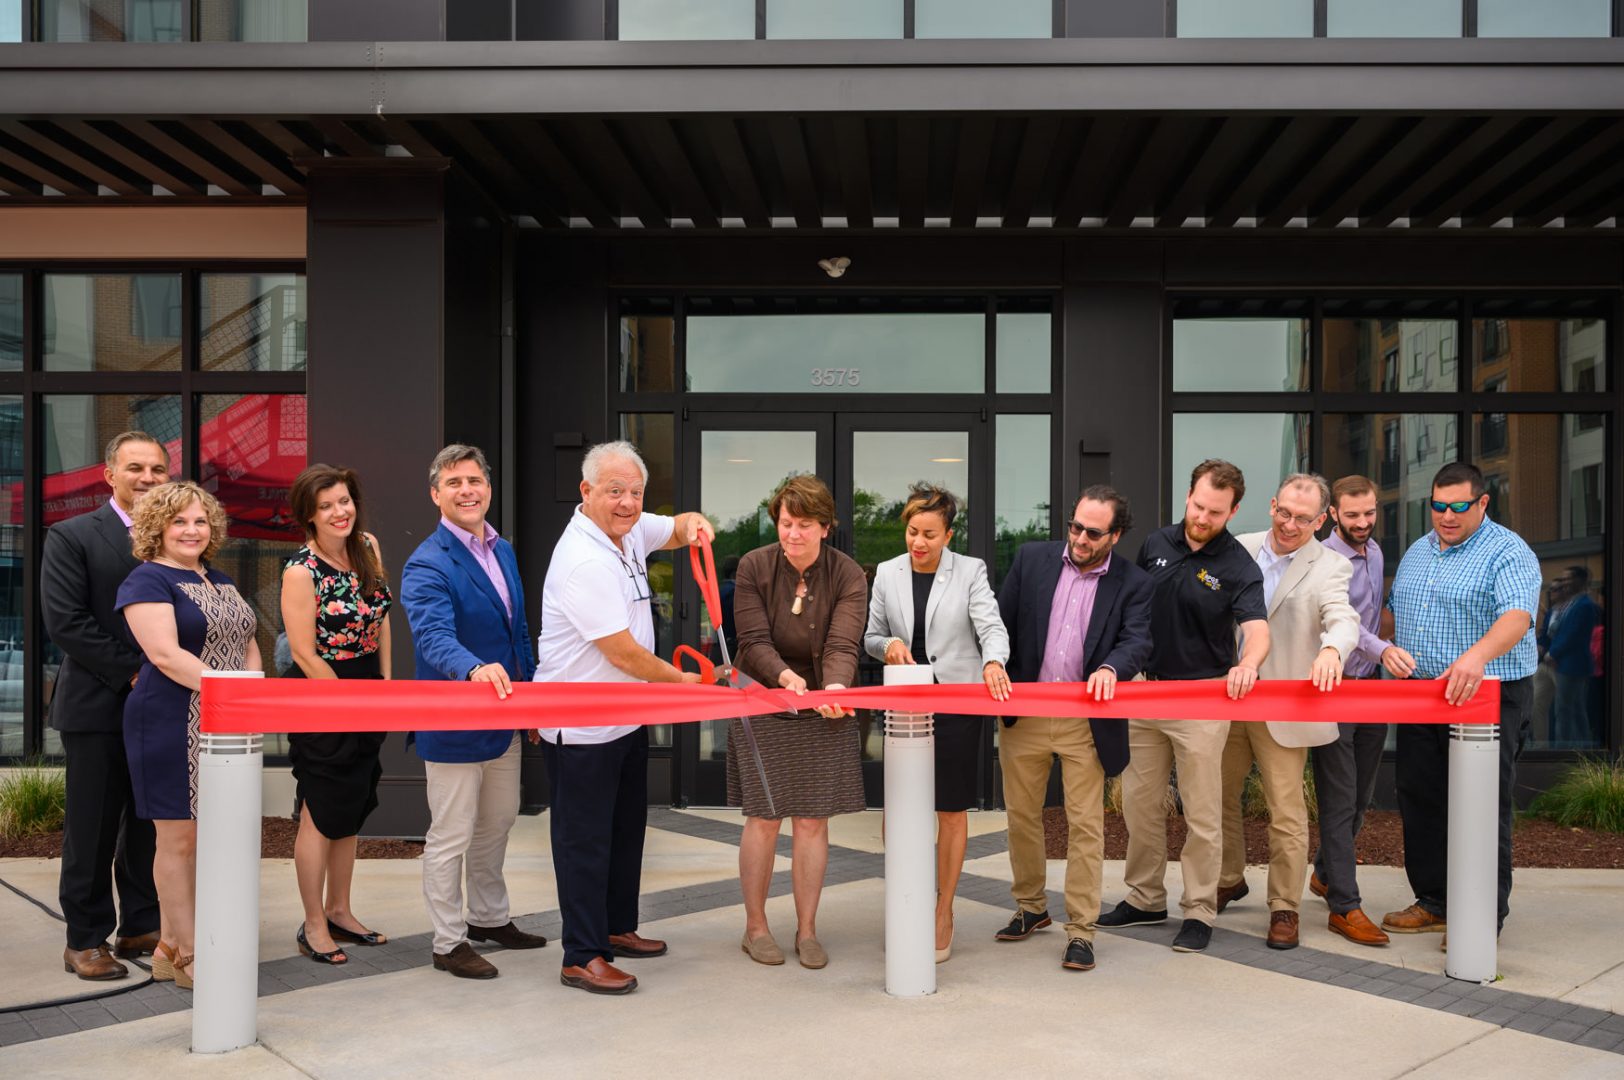 The Concord Celebrates Grand Opening & Ribbon Cutting Ceremony - The ...